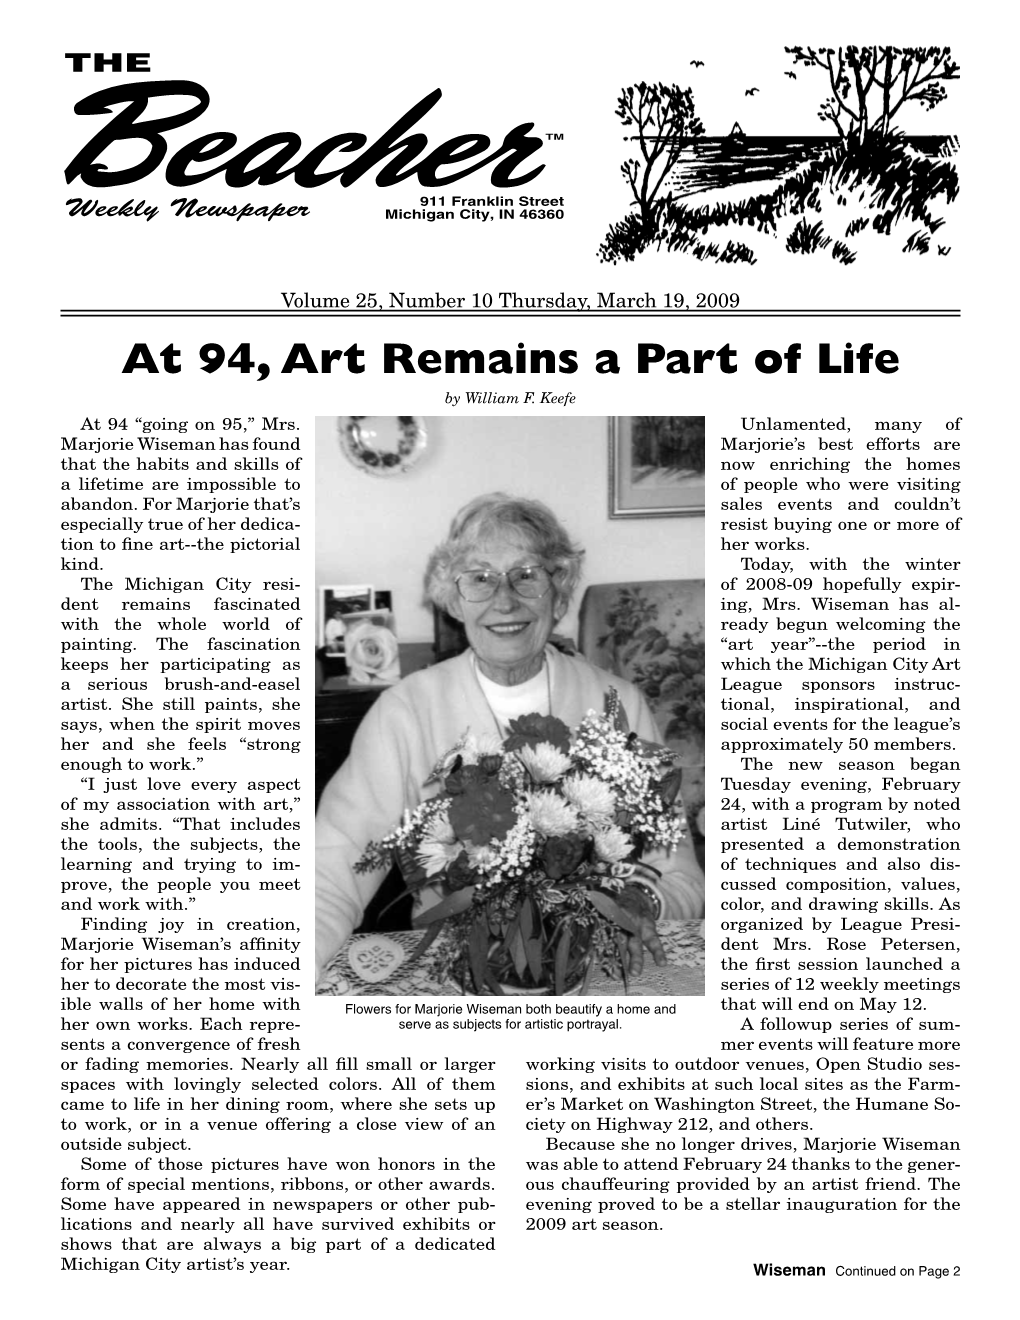 At 94, Art Remains a Part of Life by William F